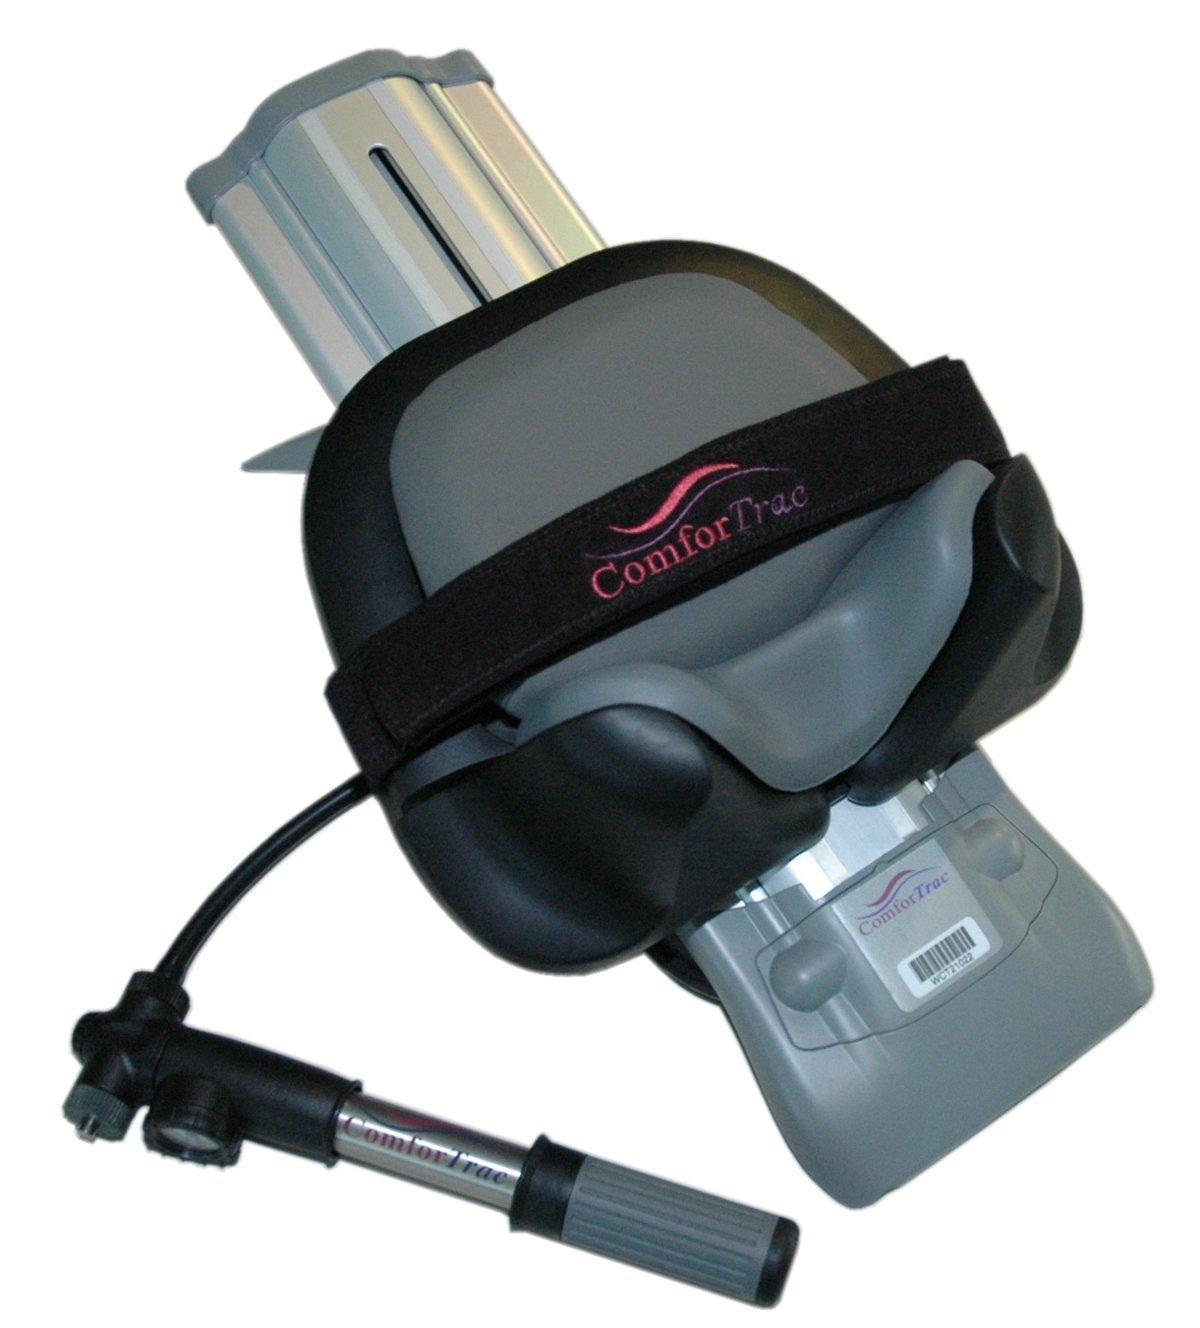 Comfortrac Cervical Traction Device, Unit Only - $356.46 MSRP